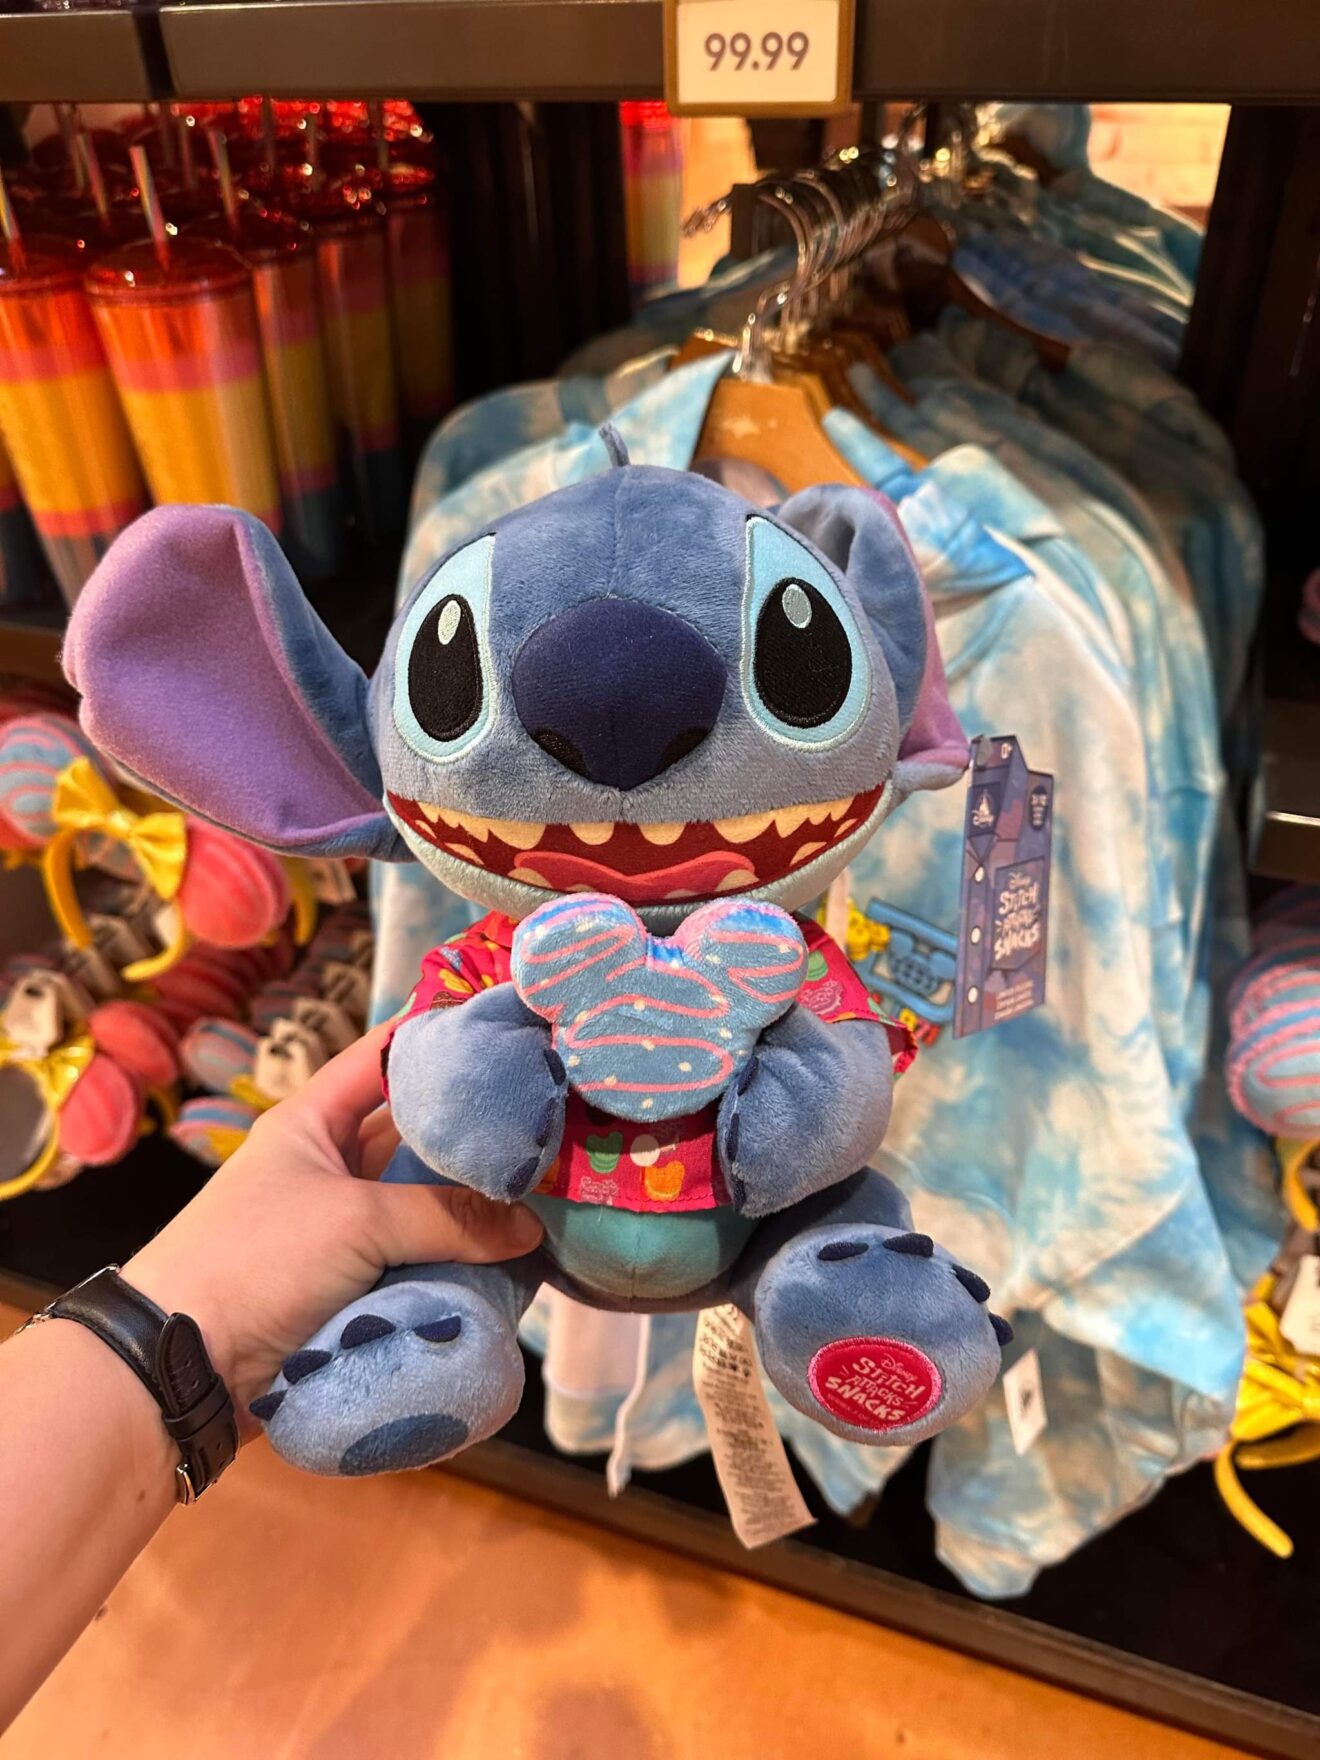 New Disney Eats Macaron Merchandise Spotted At Disney World! | Chip and ...